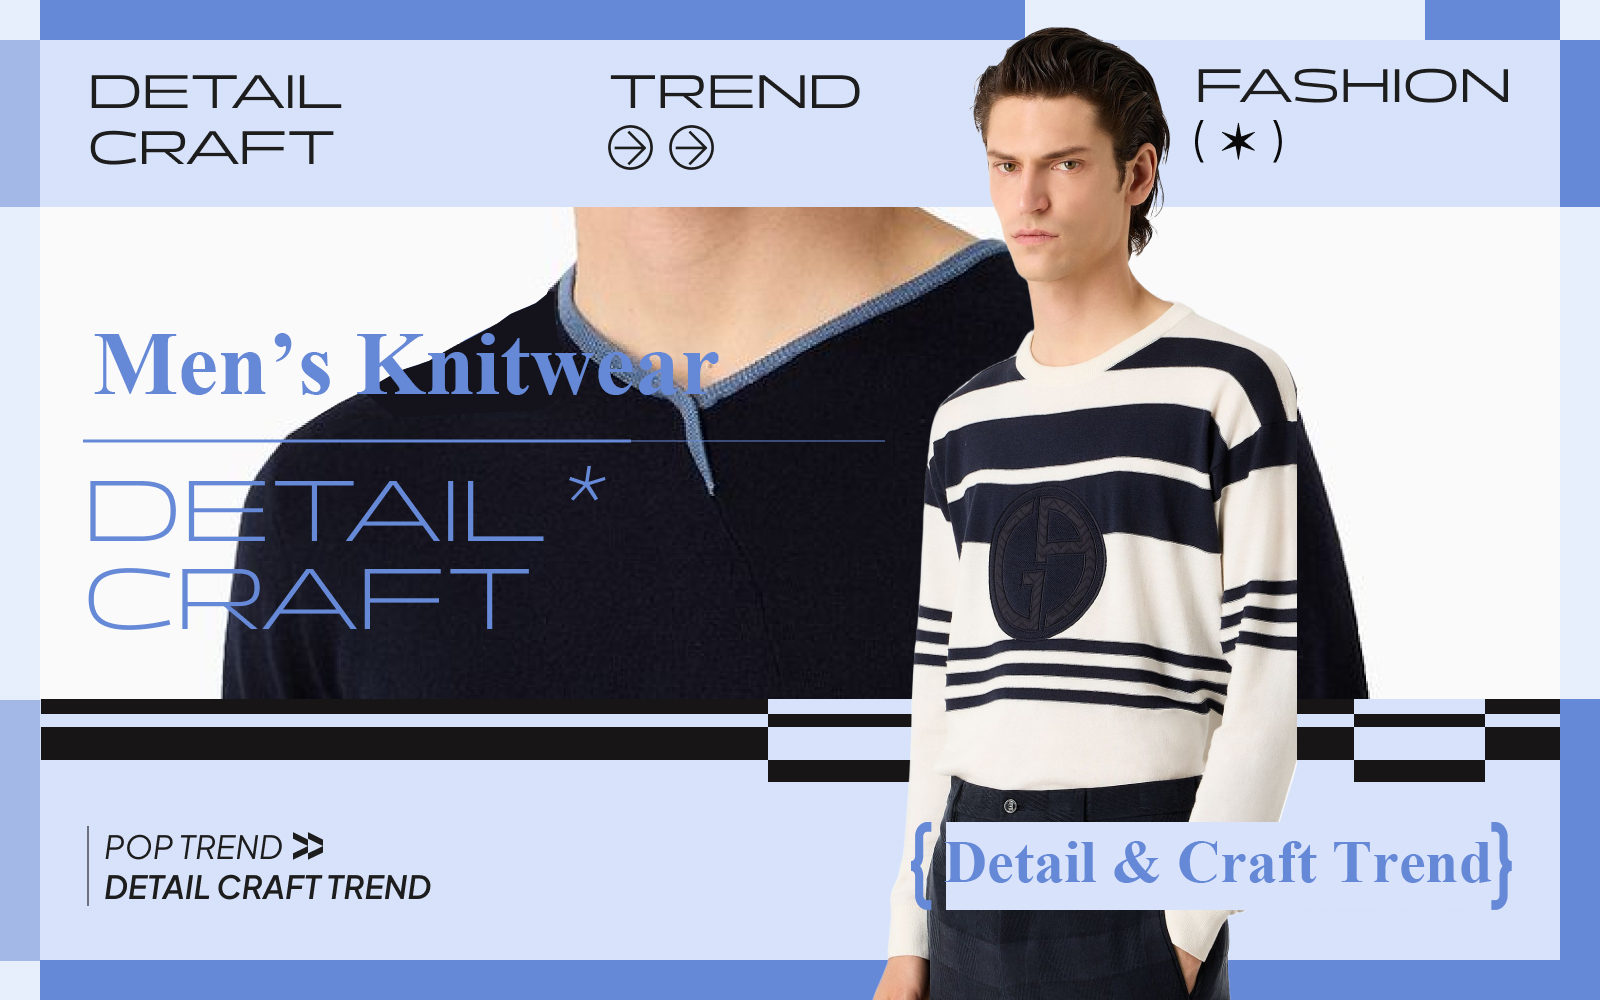 Business Commuter -- The Detail & Craft Trend for Men's Knitwear